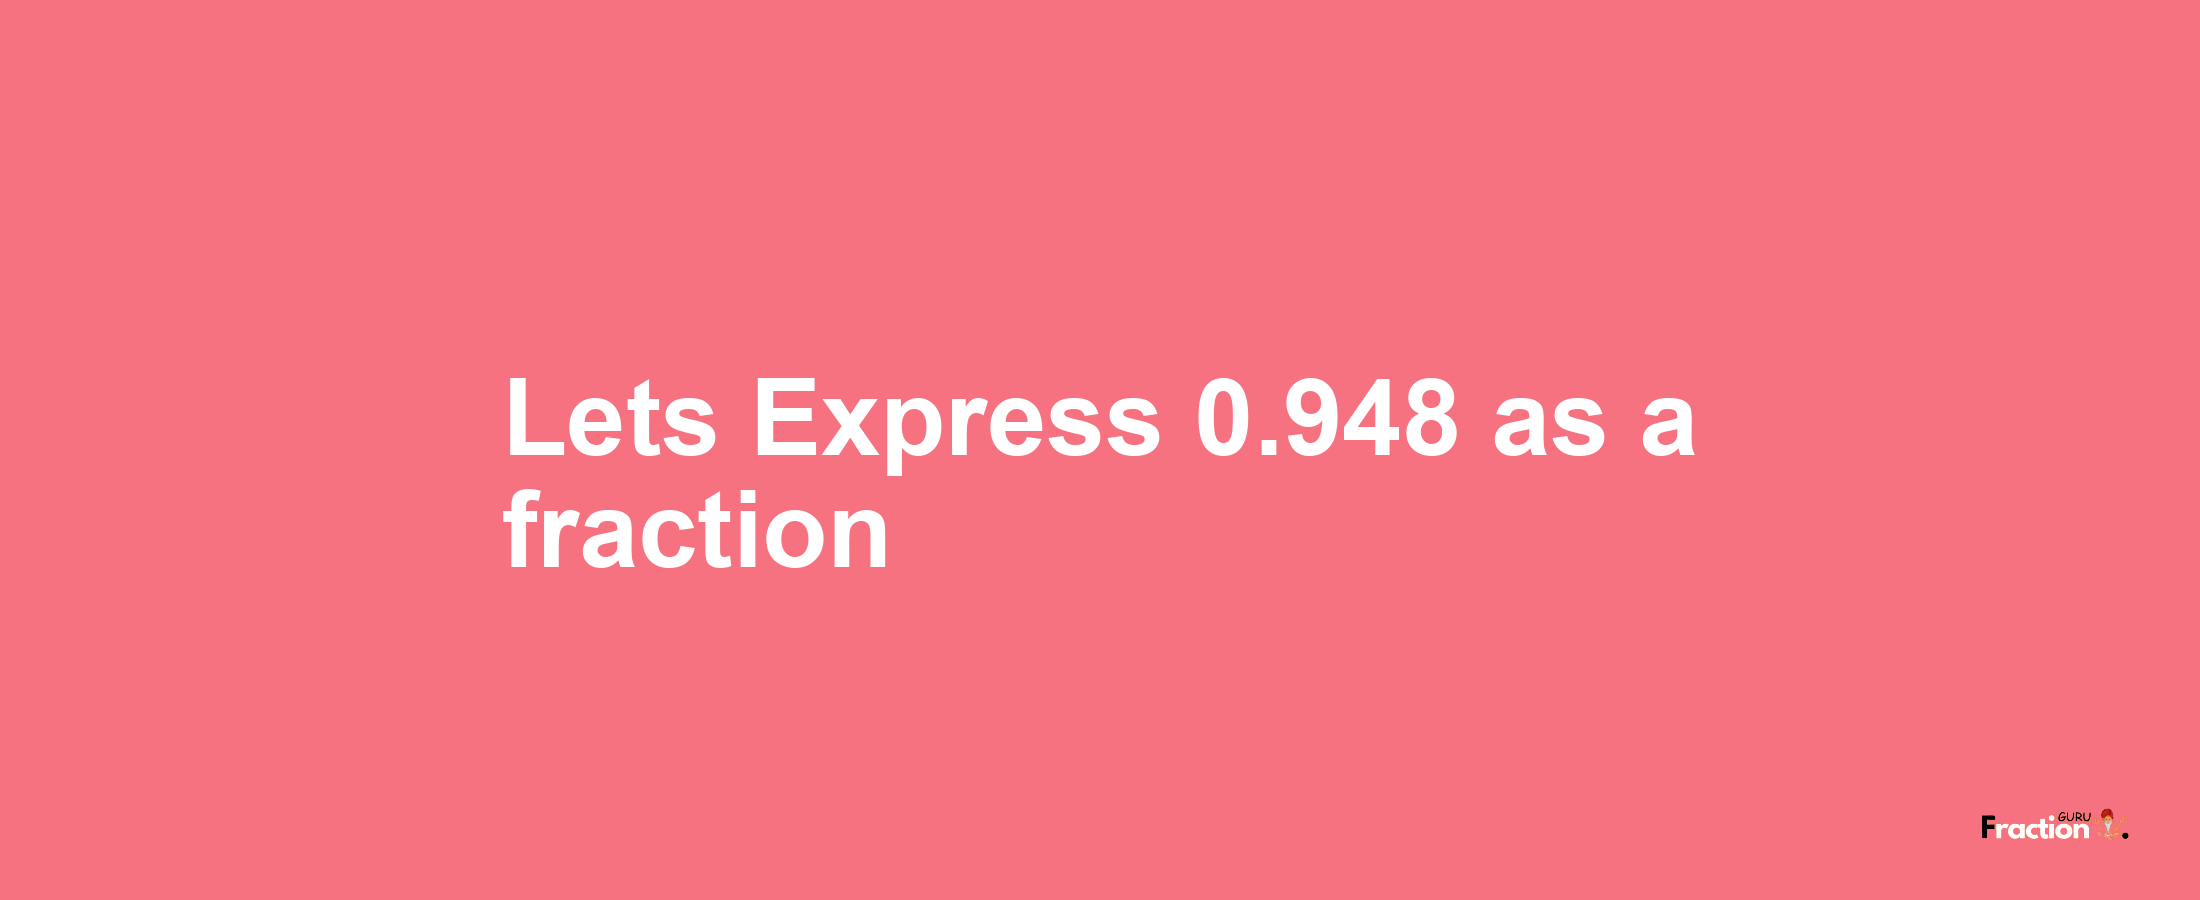 Lets Express 0.948 as afraction